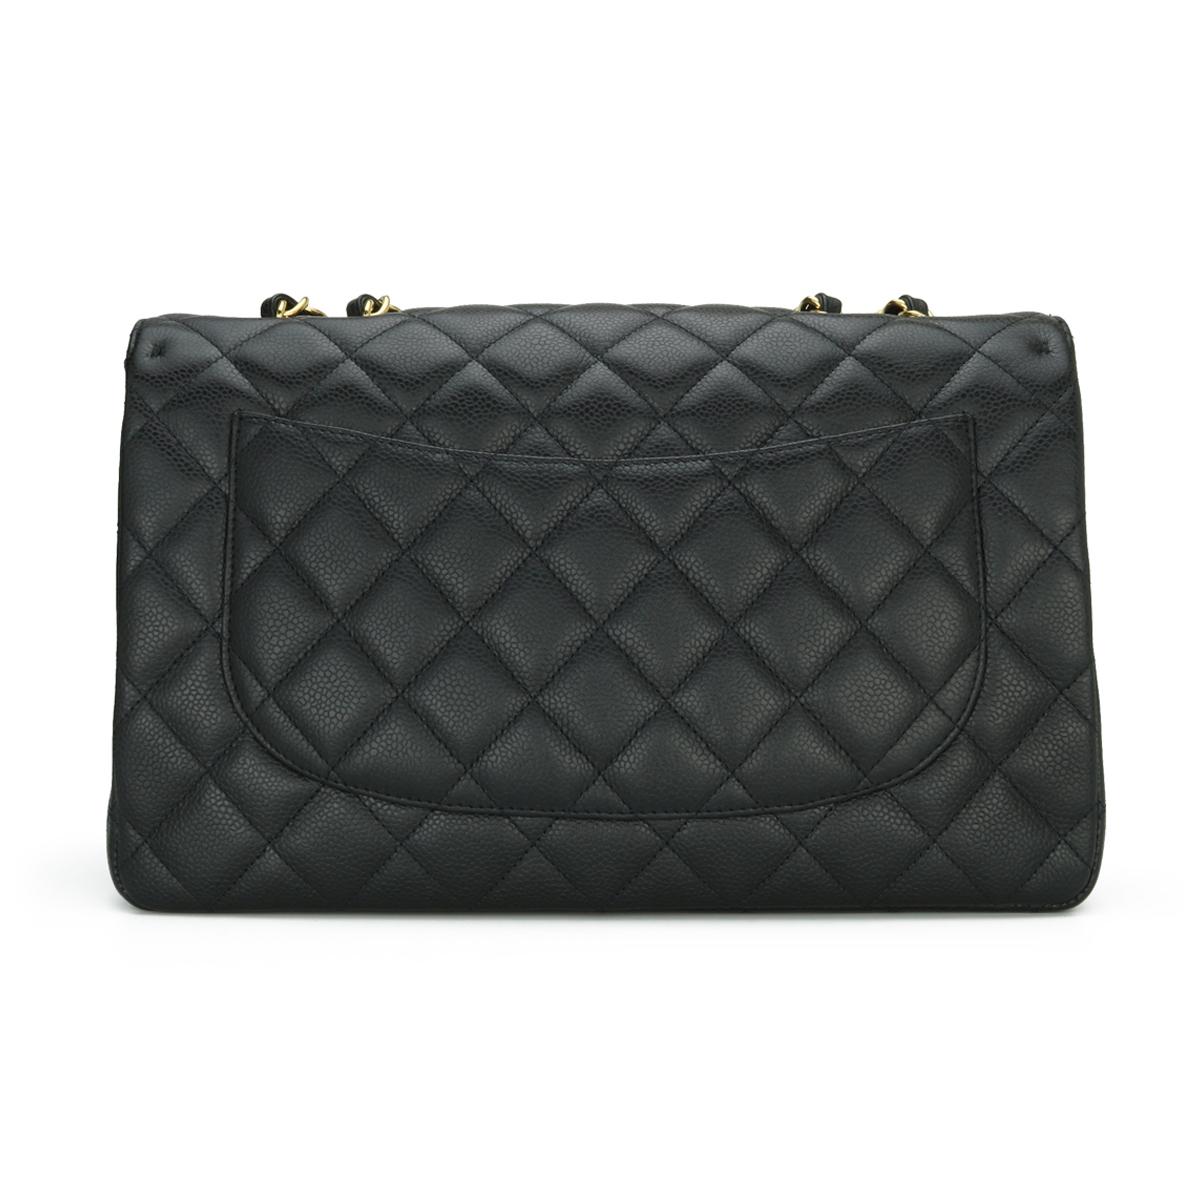 CHANEL Single Flap Jumbo Bag Black Caviar with Gold Hardware 2010 In Excellent Condition For Sale In Huddersfield, GB